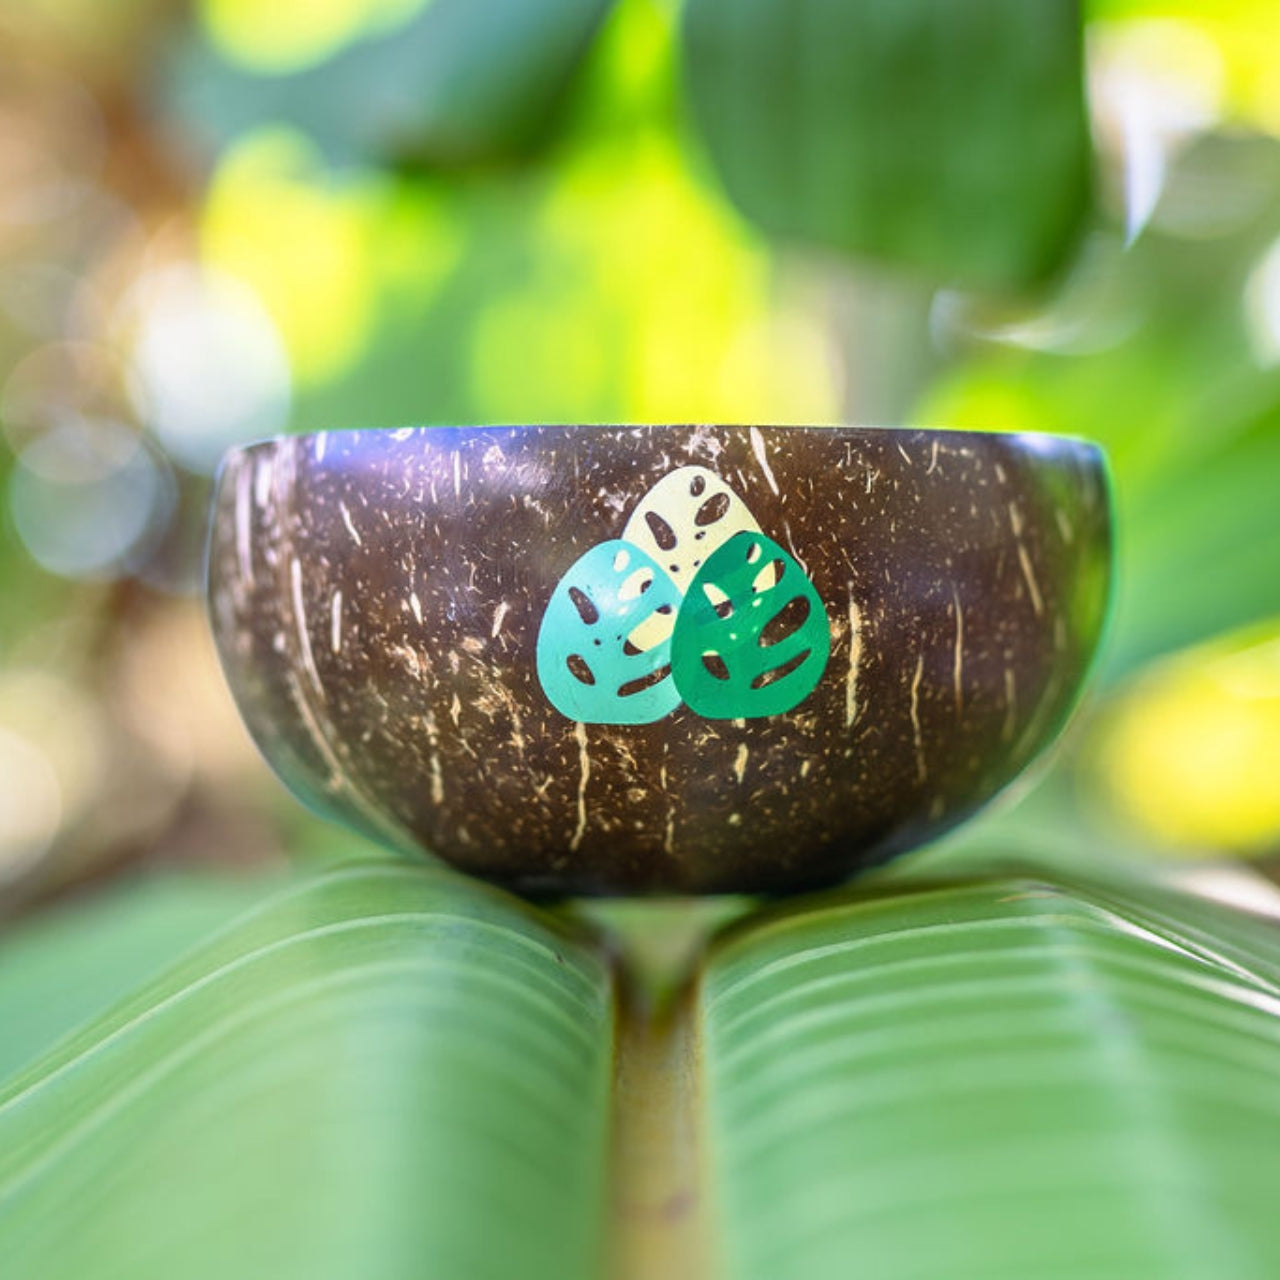 Gifts for Nature Lovers - Coconut Bowls